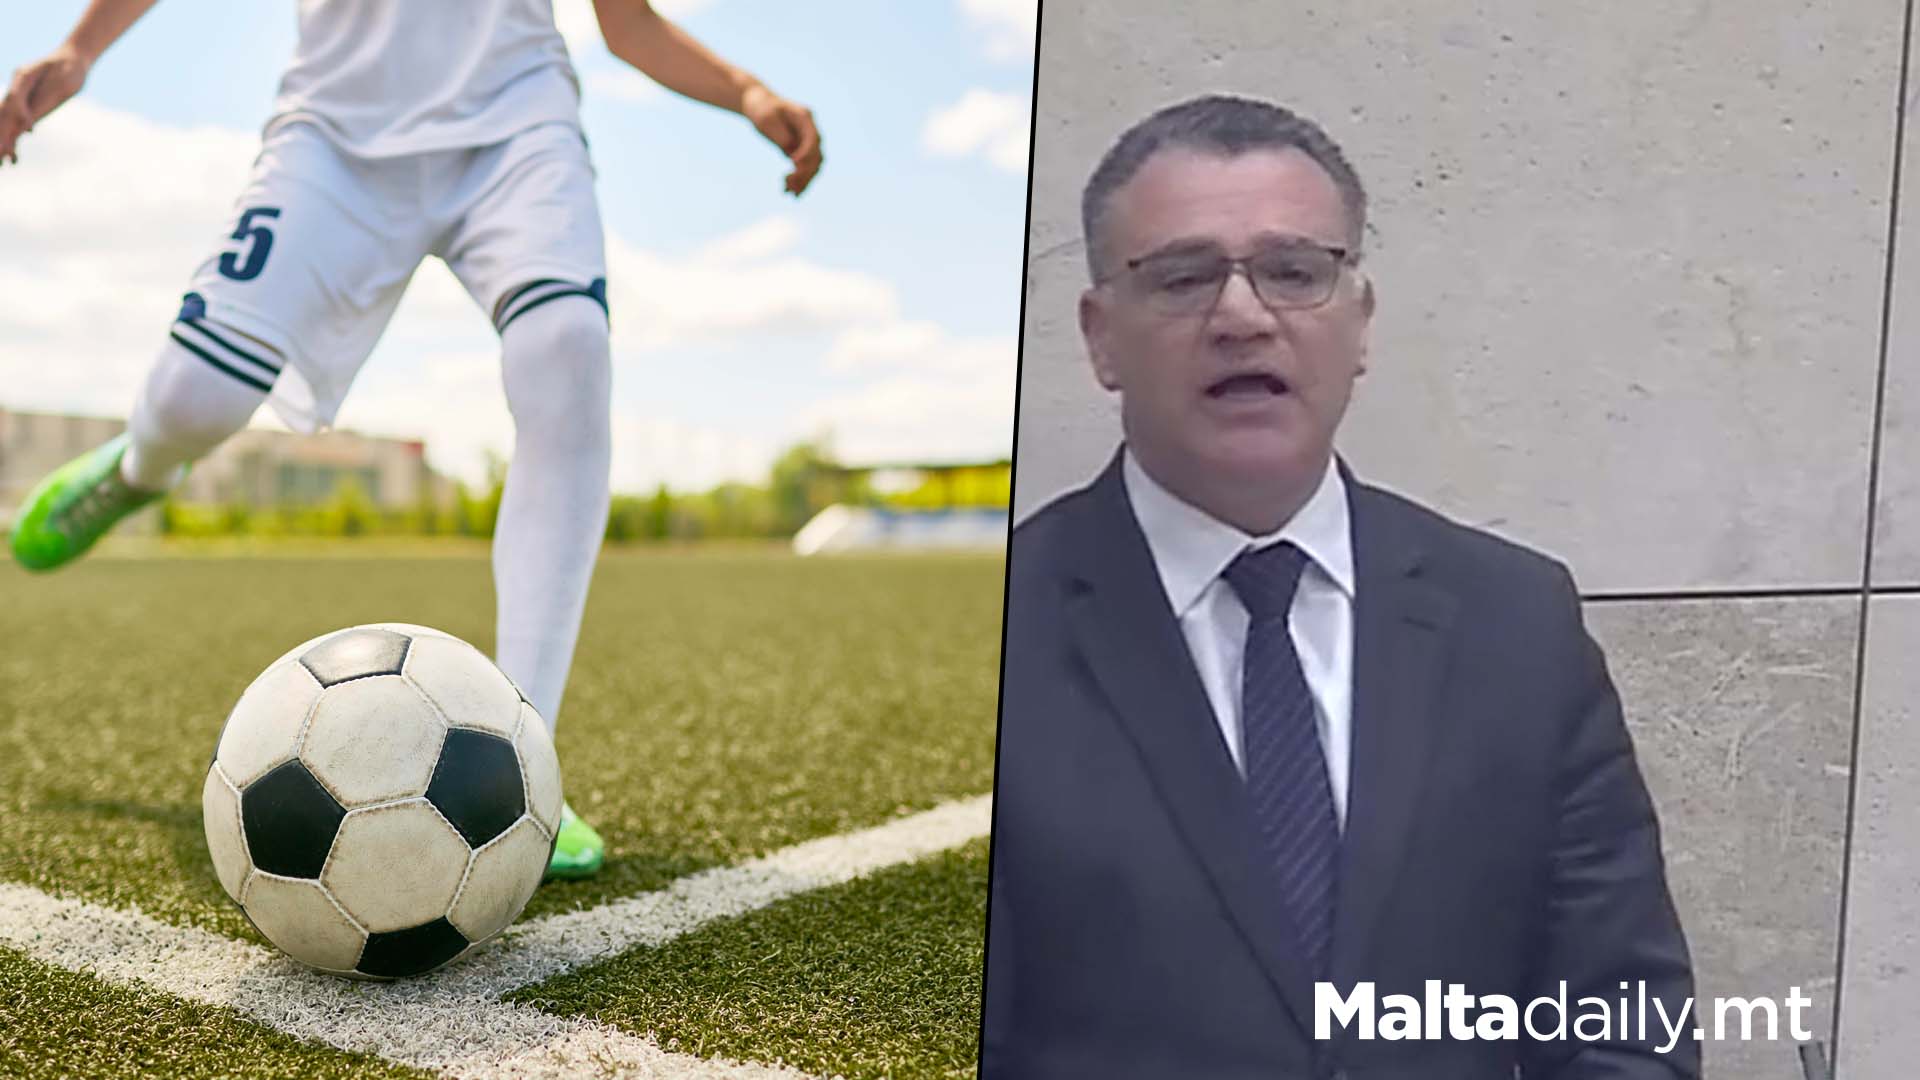 PN MP Alleges Some Football Clubs Know Results Before Match